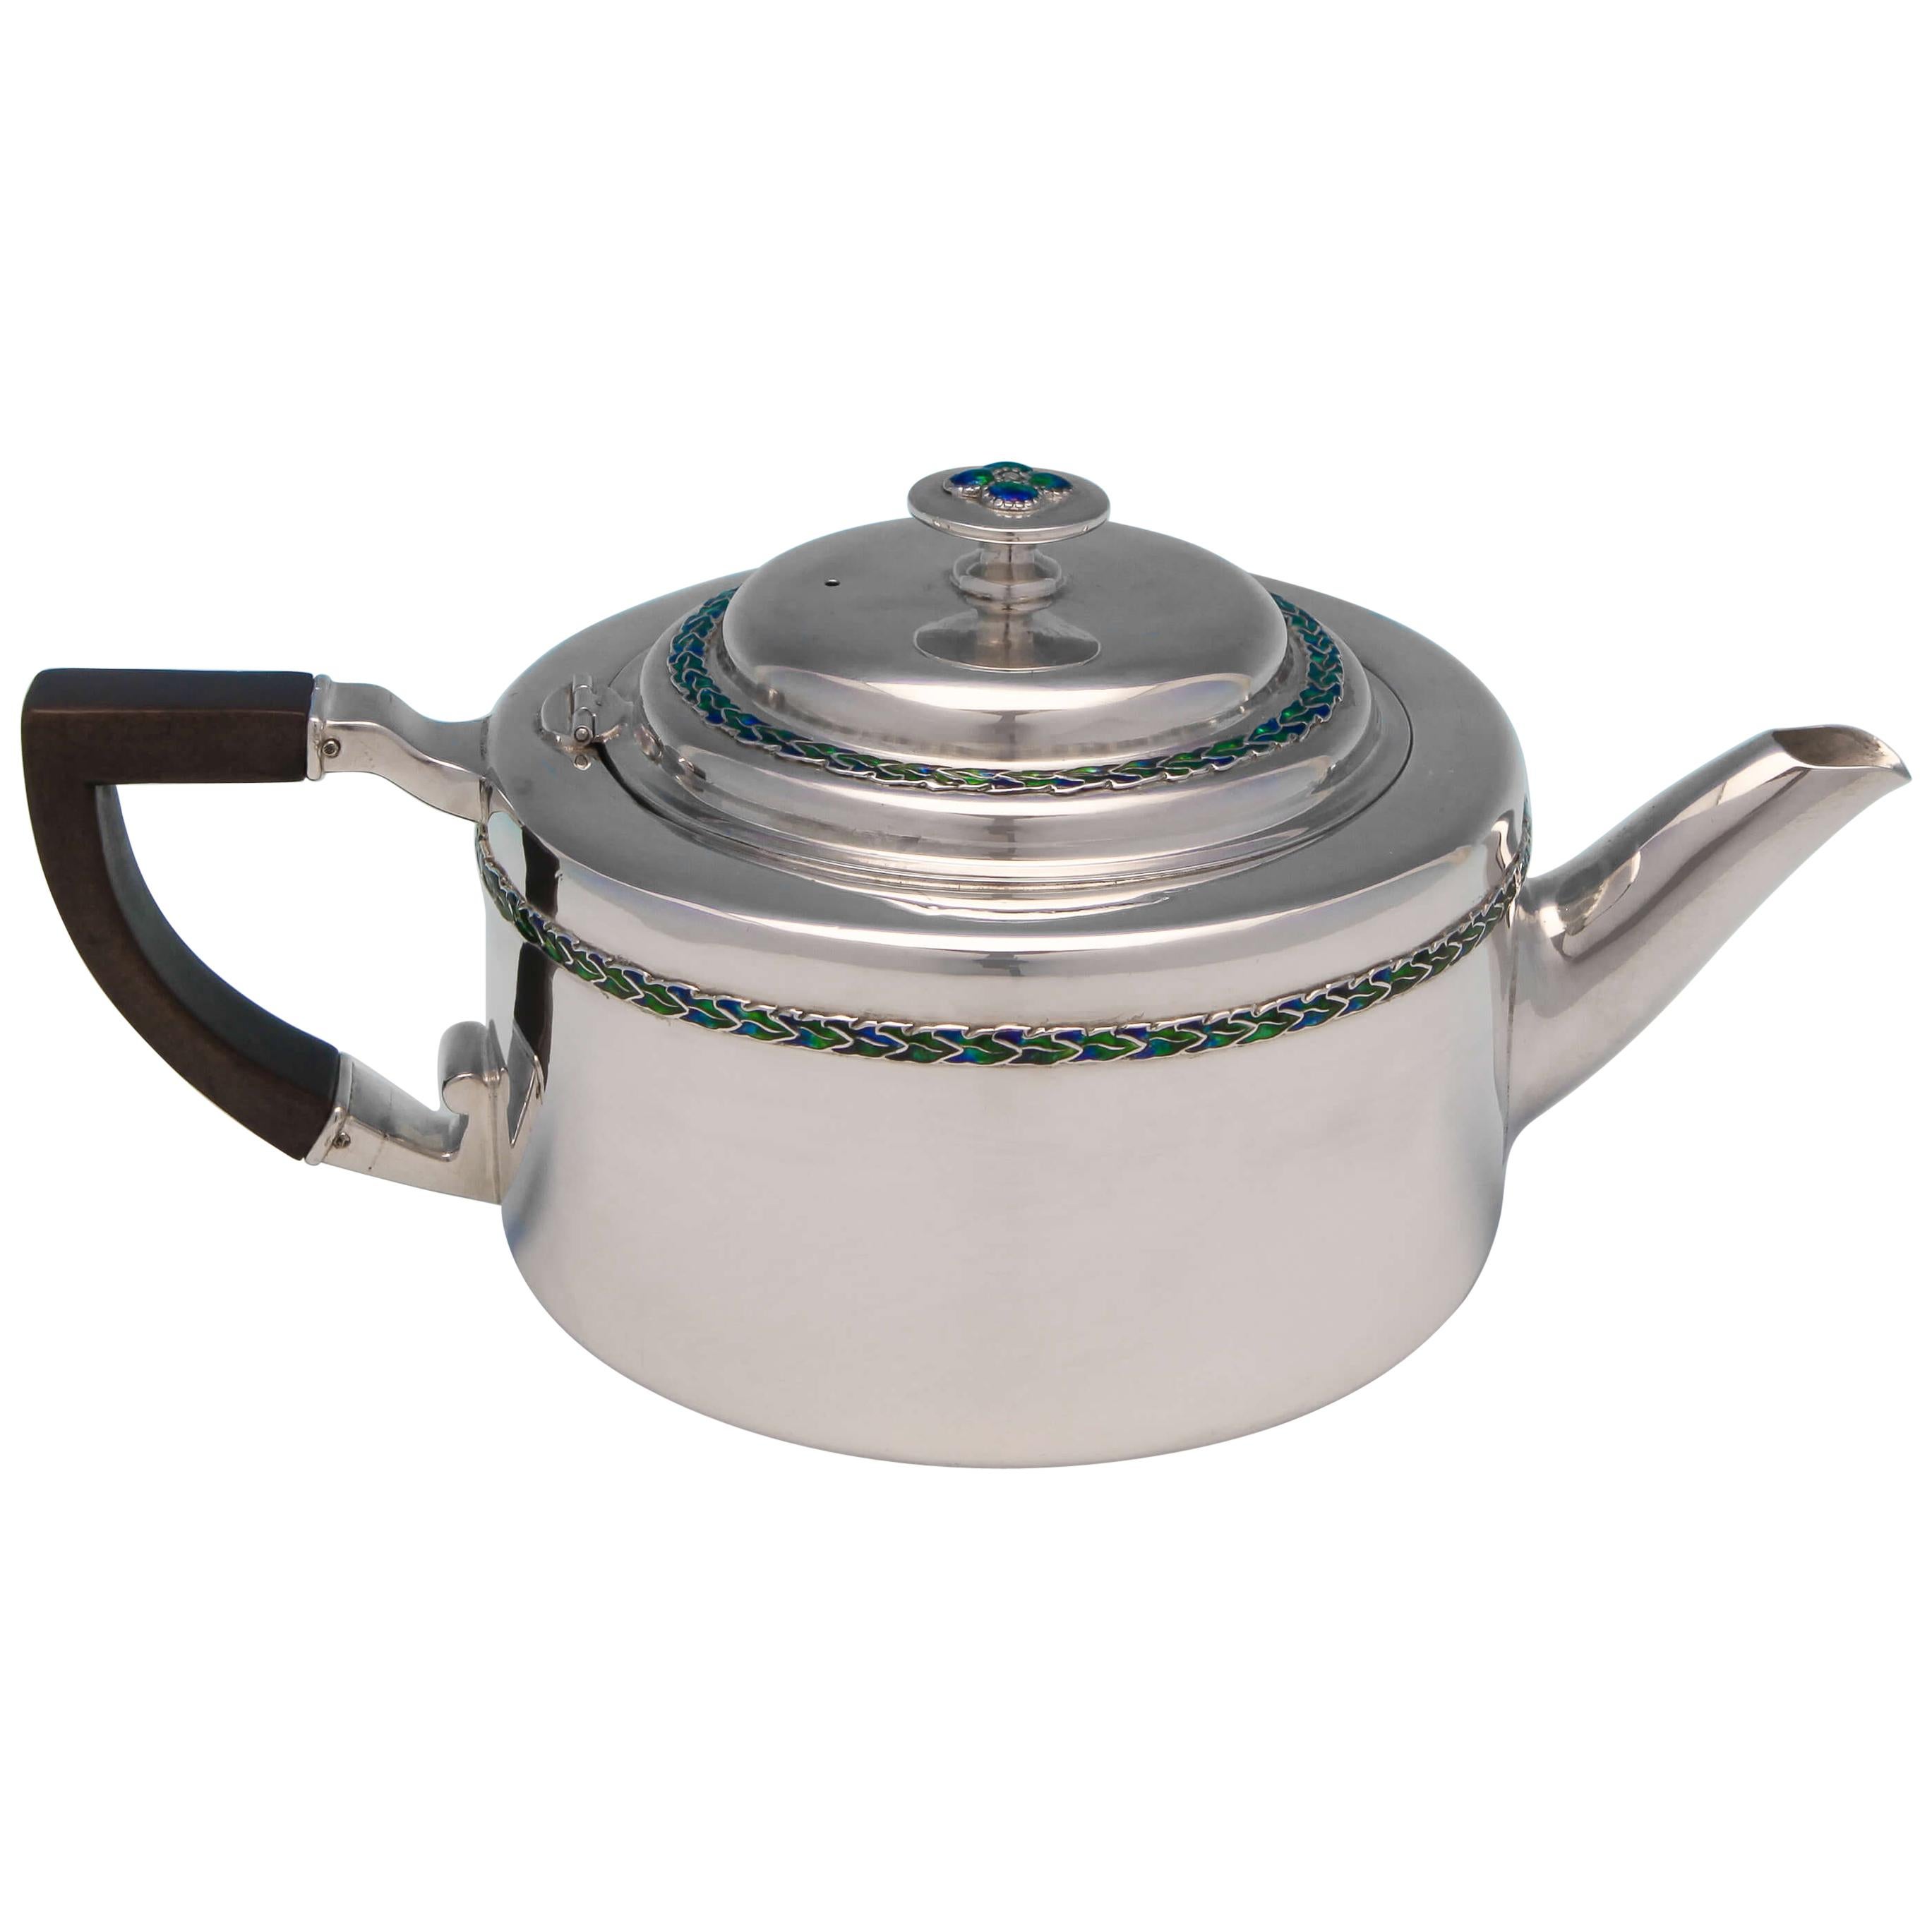 Antique Sterling Silver Enamelled Teapot by Liberty & Co. 1909